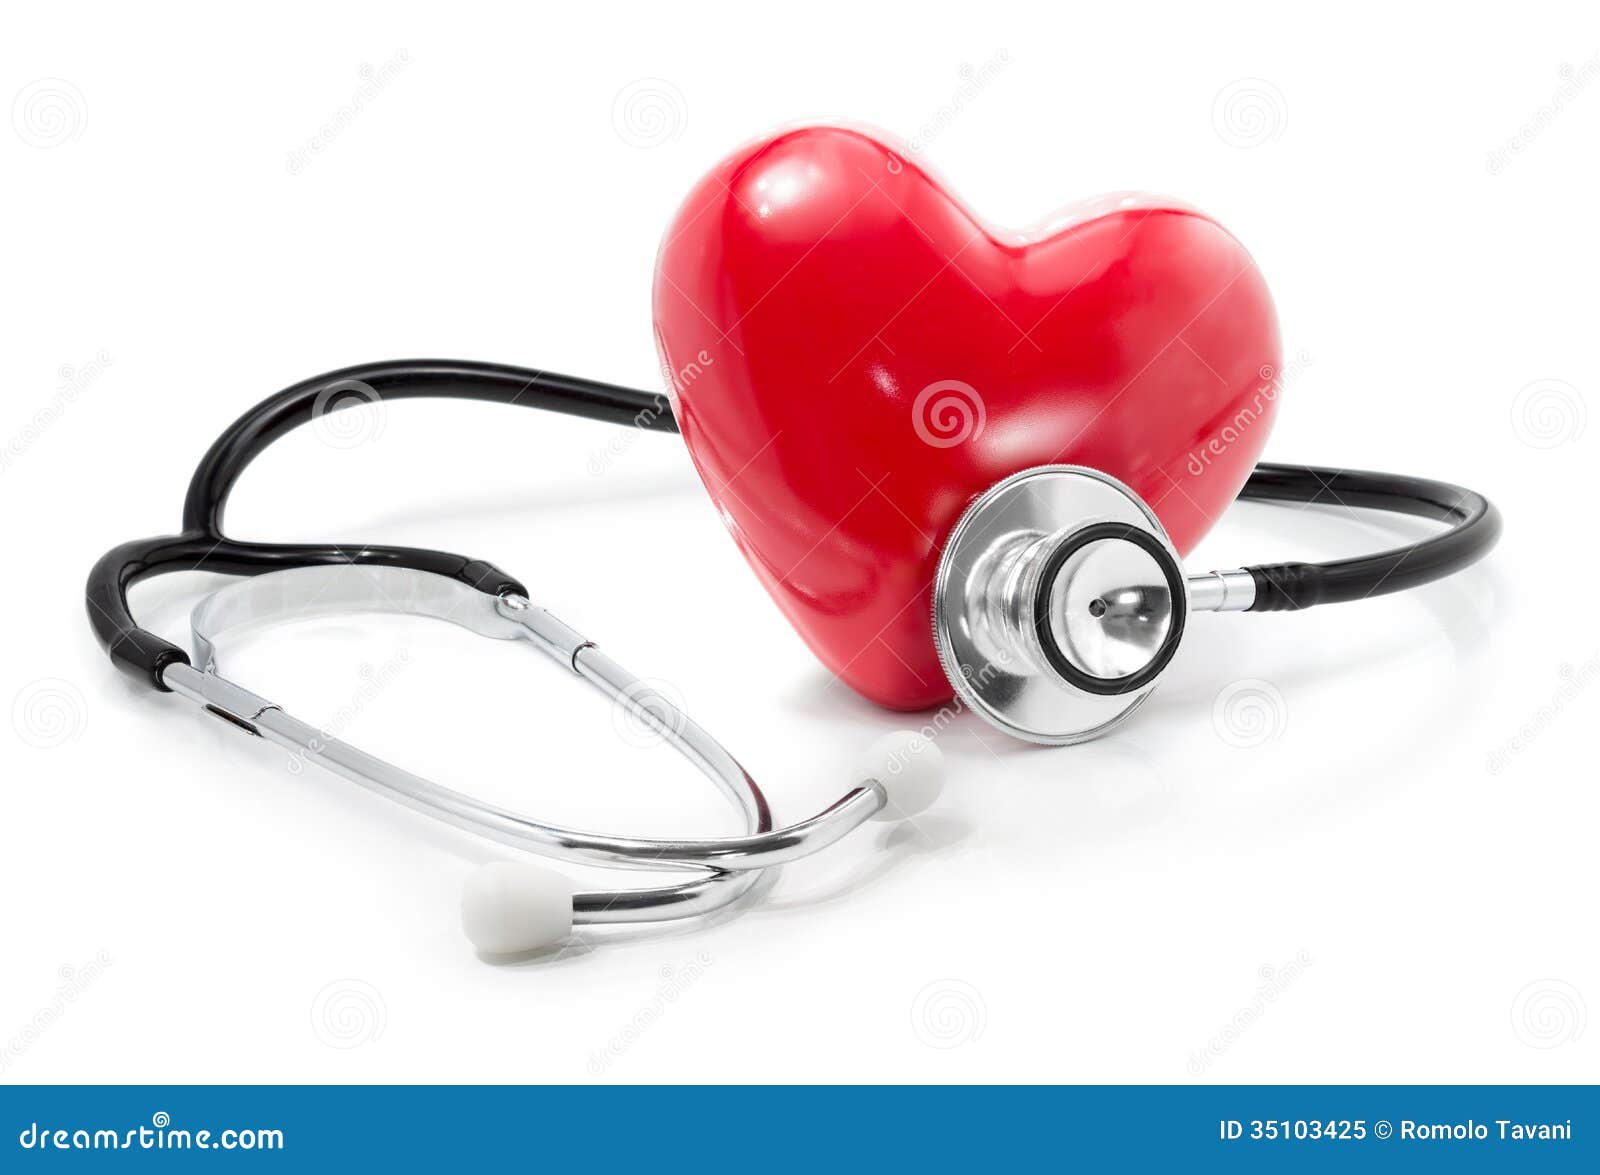 listen to your heart: health care concept